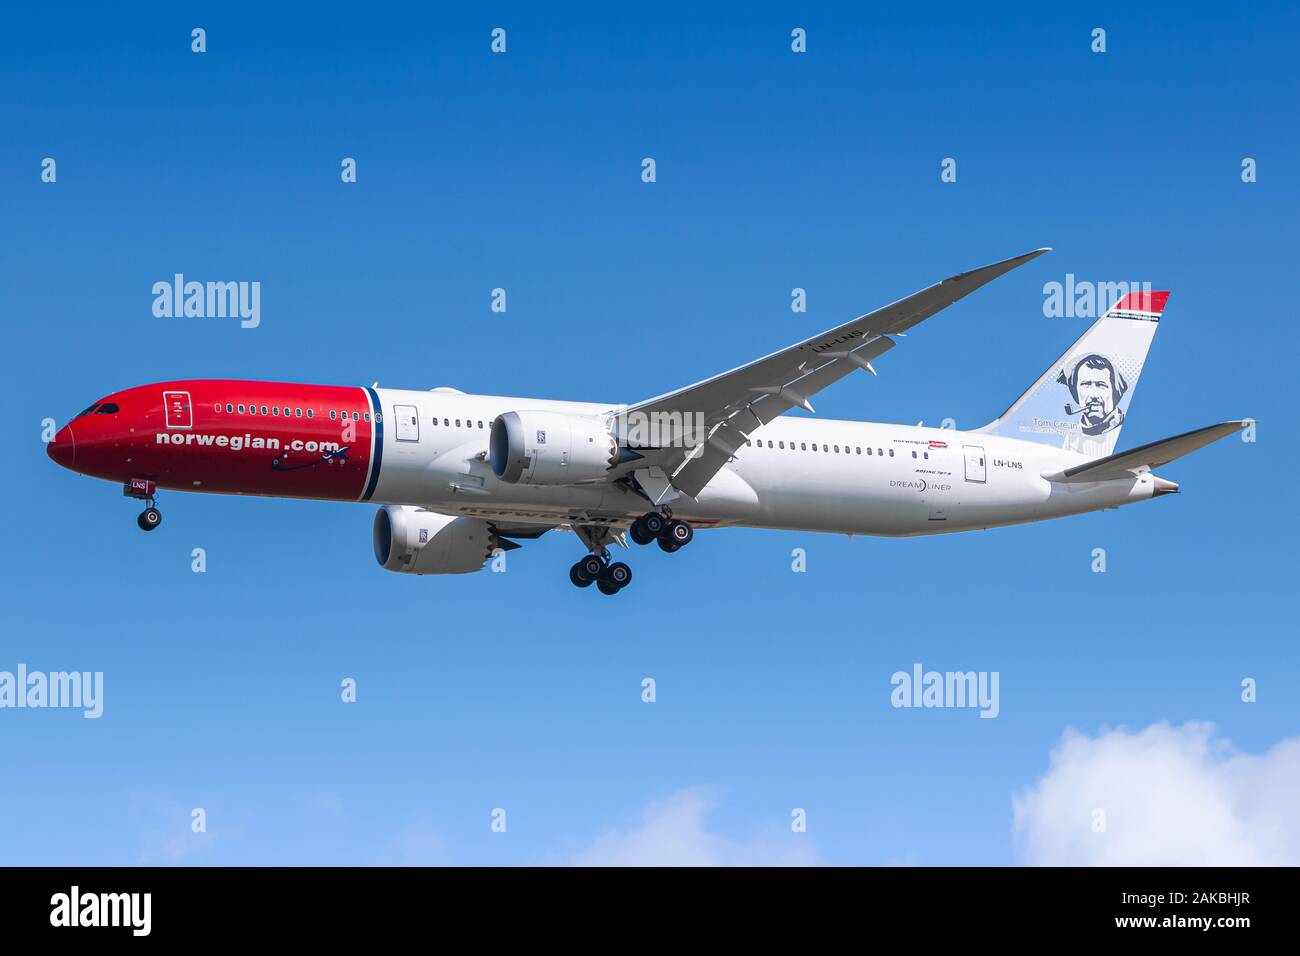 Paris, France - August 17, 2018: Norwegian Boeing 787 Dreamliner airplane at Paris Charles de Gaulle airport (CDG) in France. Boeing is an aircraft ma Stock Photo